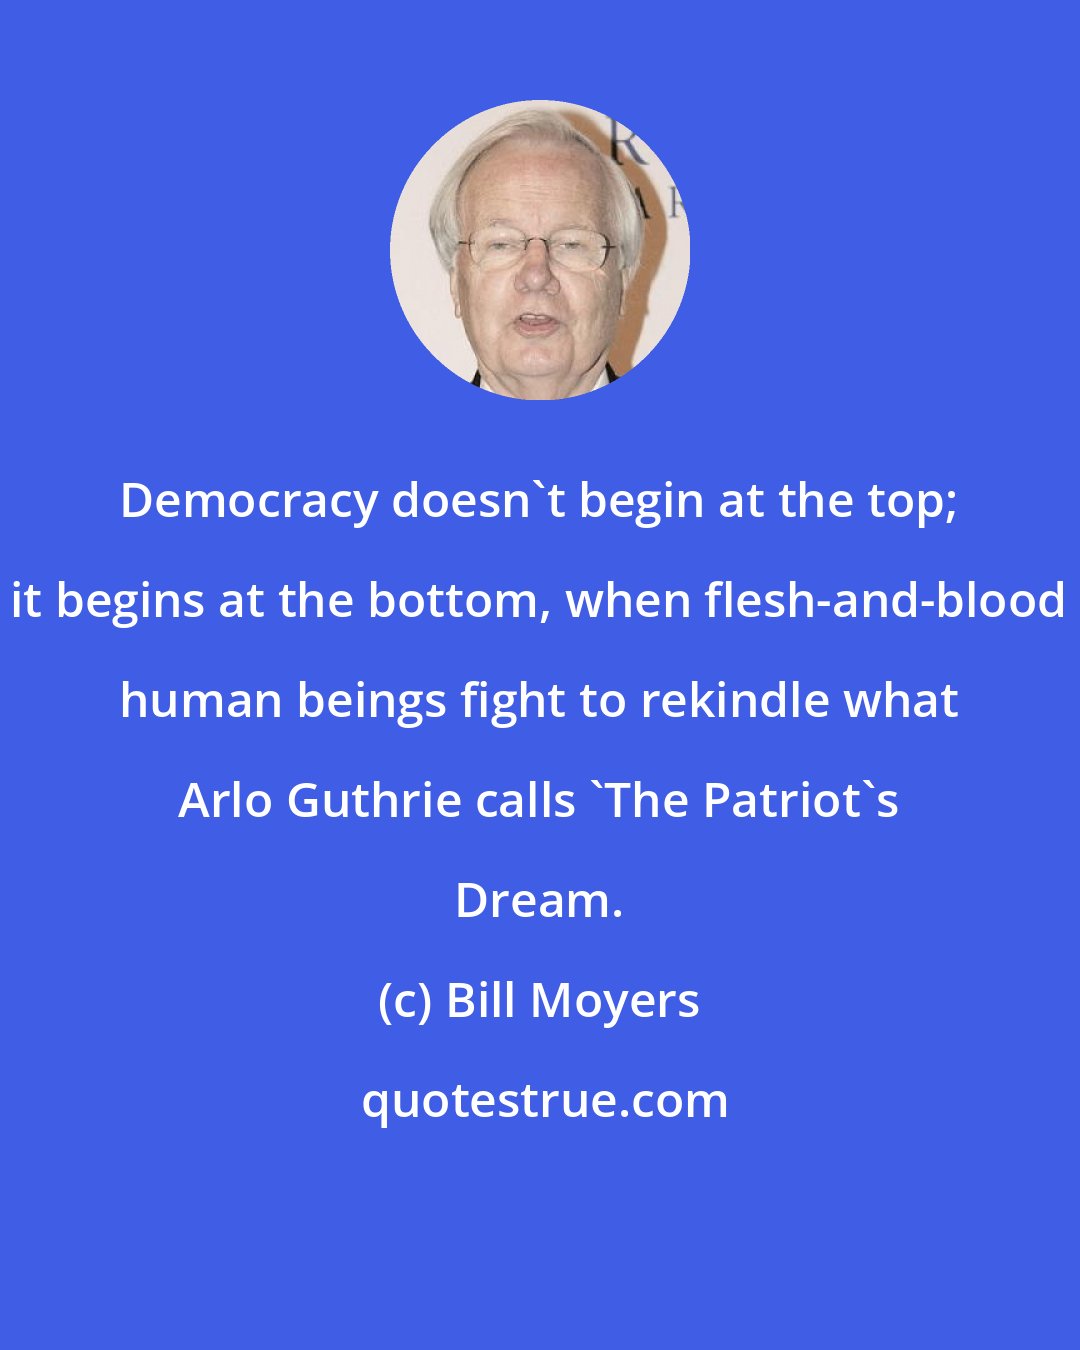 Bill Moyers: Democracy doesn't begin at the top; it begins at the bottom, when flesh-and-blood human beings fight to rekindle what Arlo Guthrie calls 'The Patriot's Dream.